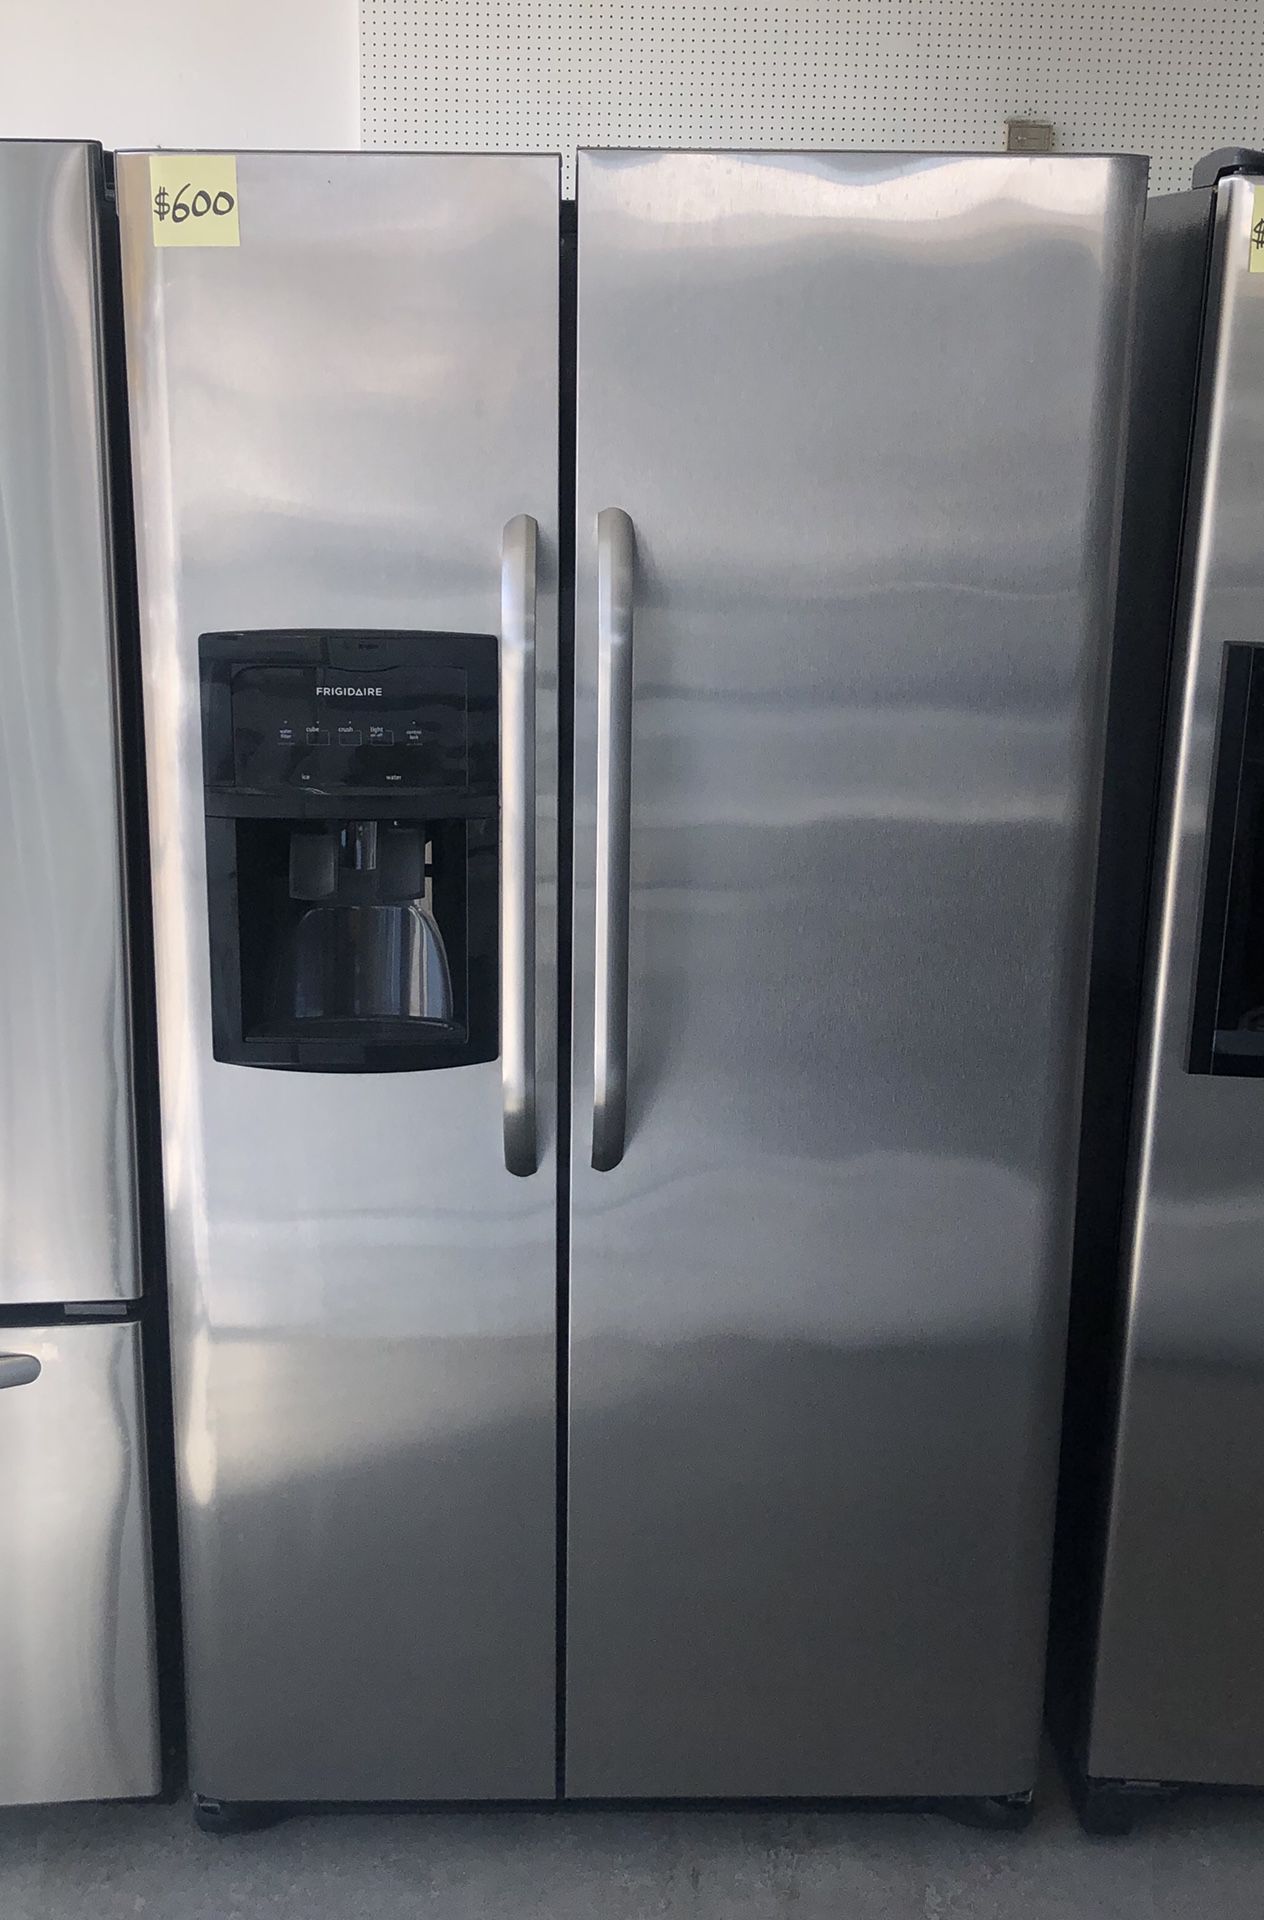 Comes with free 6 Months Warranty-like new stainless steel side by side refrigerator Frigidaire